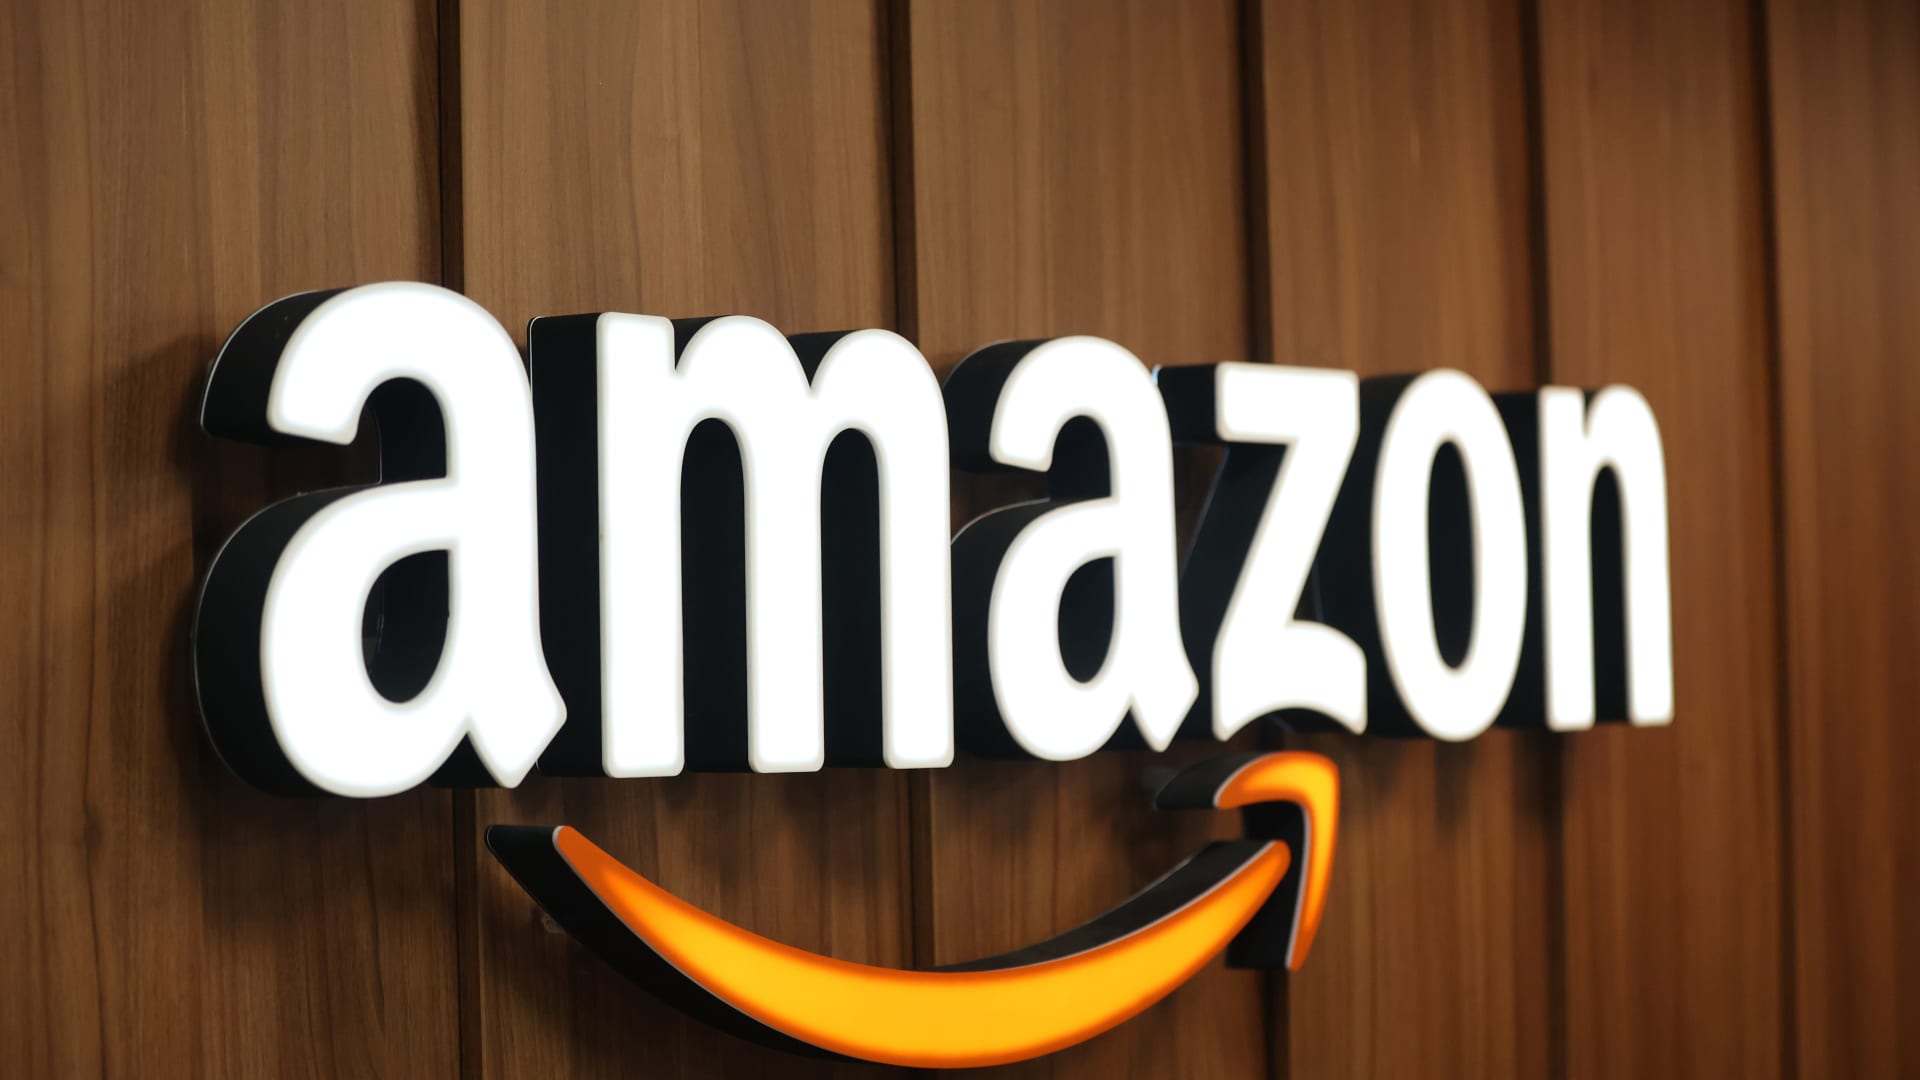 Amazon to invest up to $4 billion in Anthropic, a rival to ChatGPT developer OpenAI